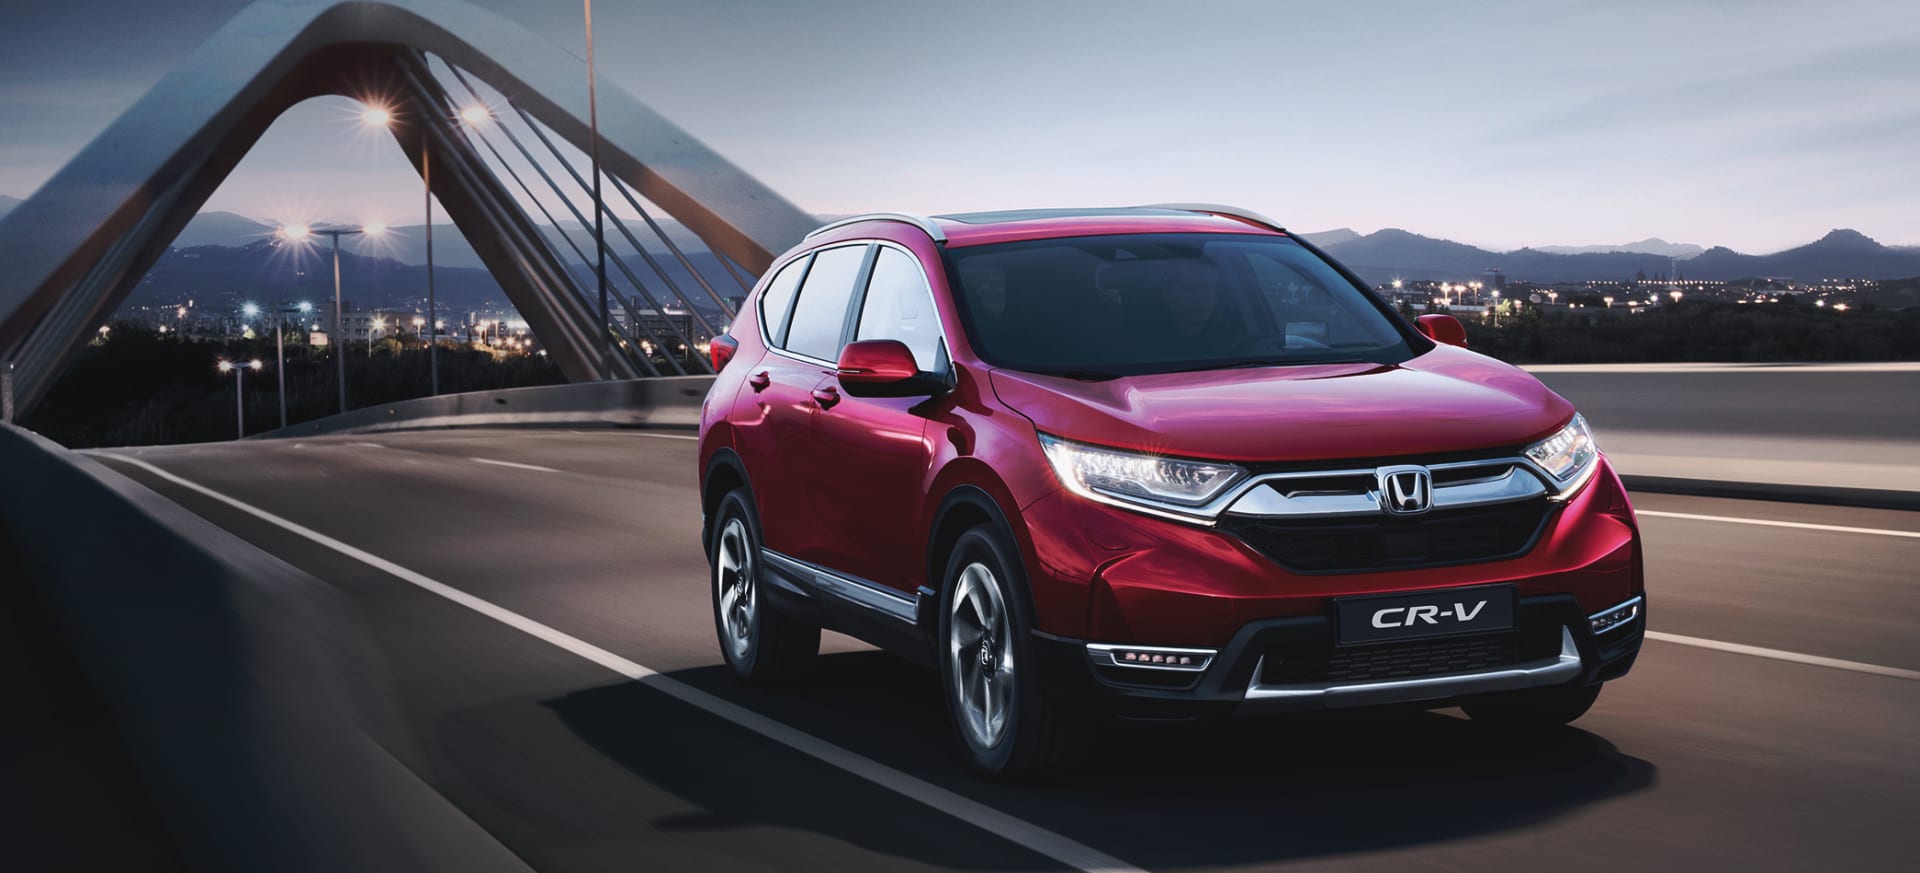 CR-V HYBRID AWD MODELS FROM ONLY £359 PER MONTH WITH £1500 DEPOSIT CONTRIBUTION